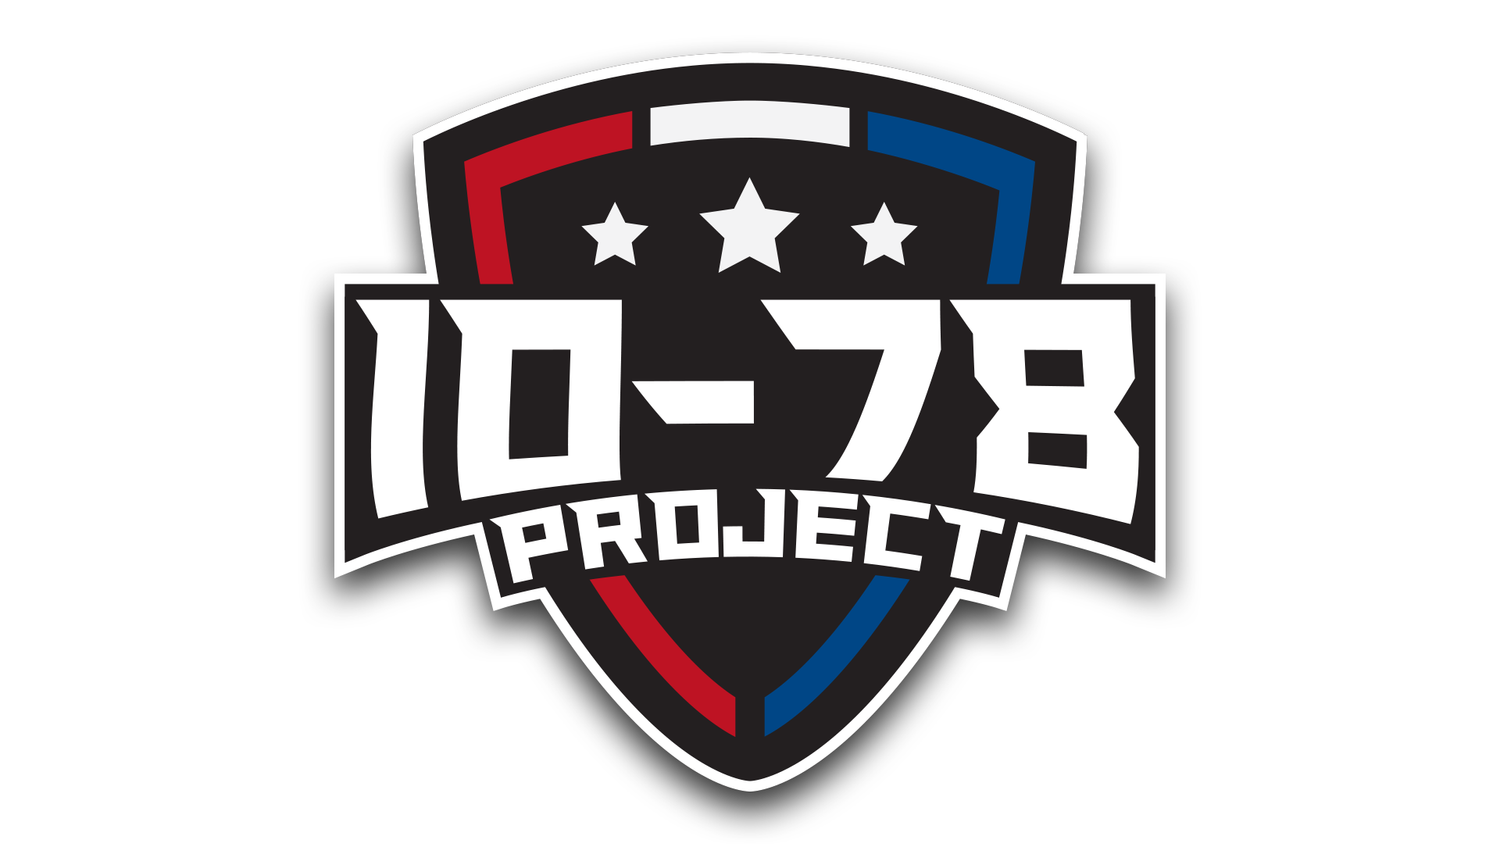 10-78 Project